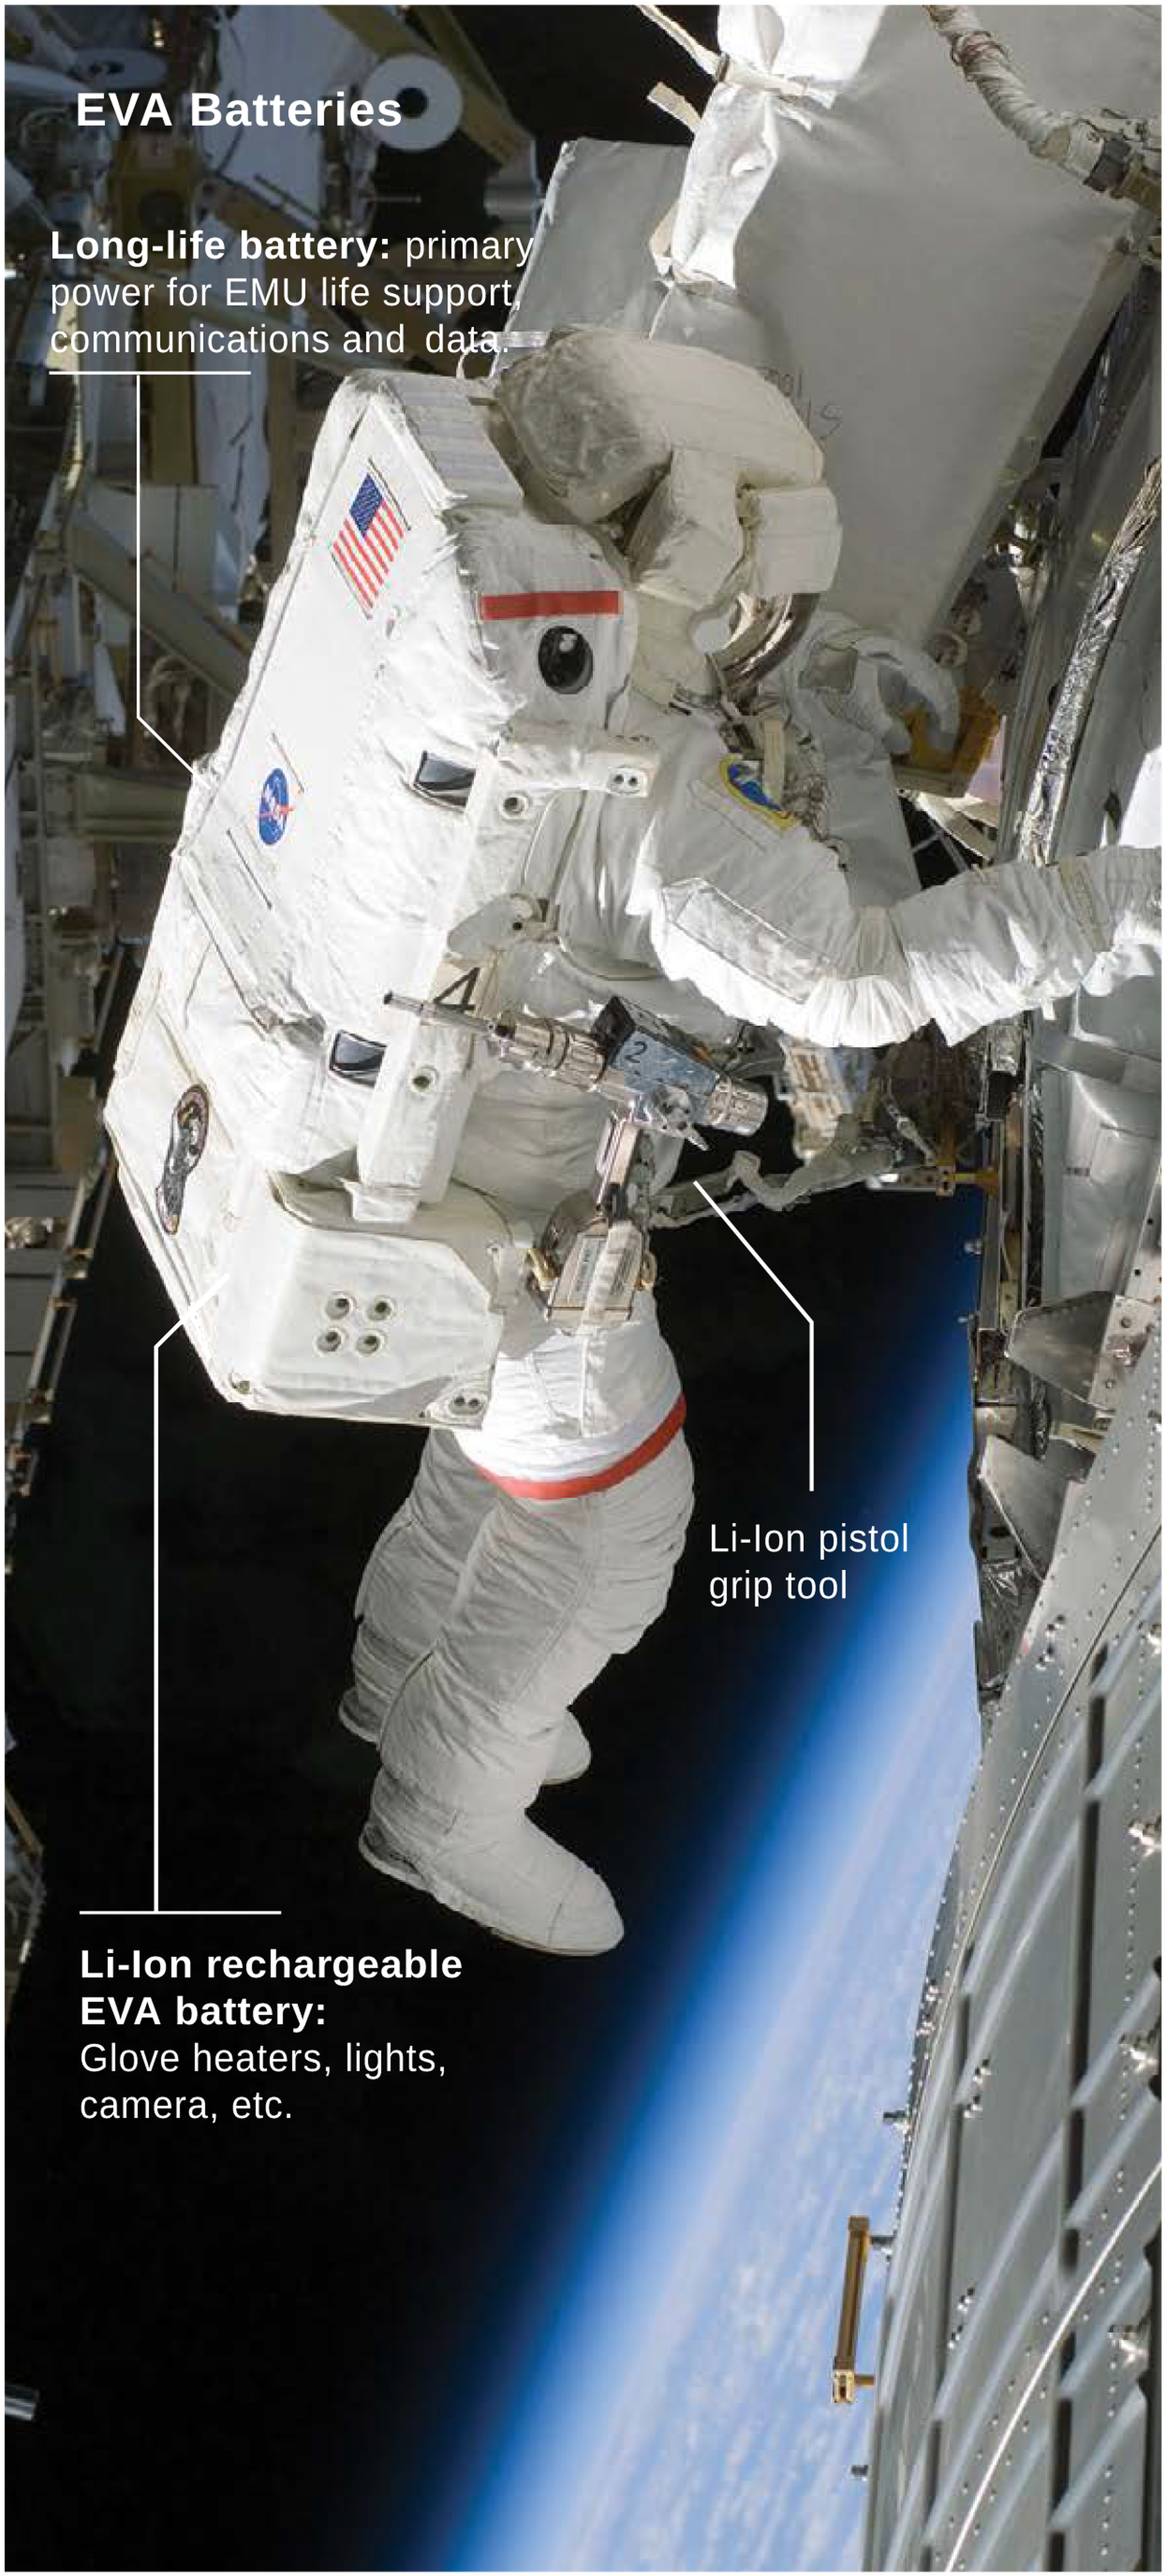 How batteries are used on NASA’s spacesuits